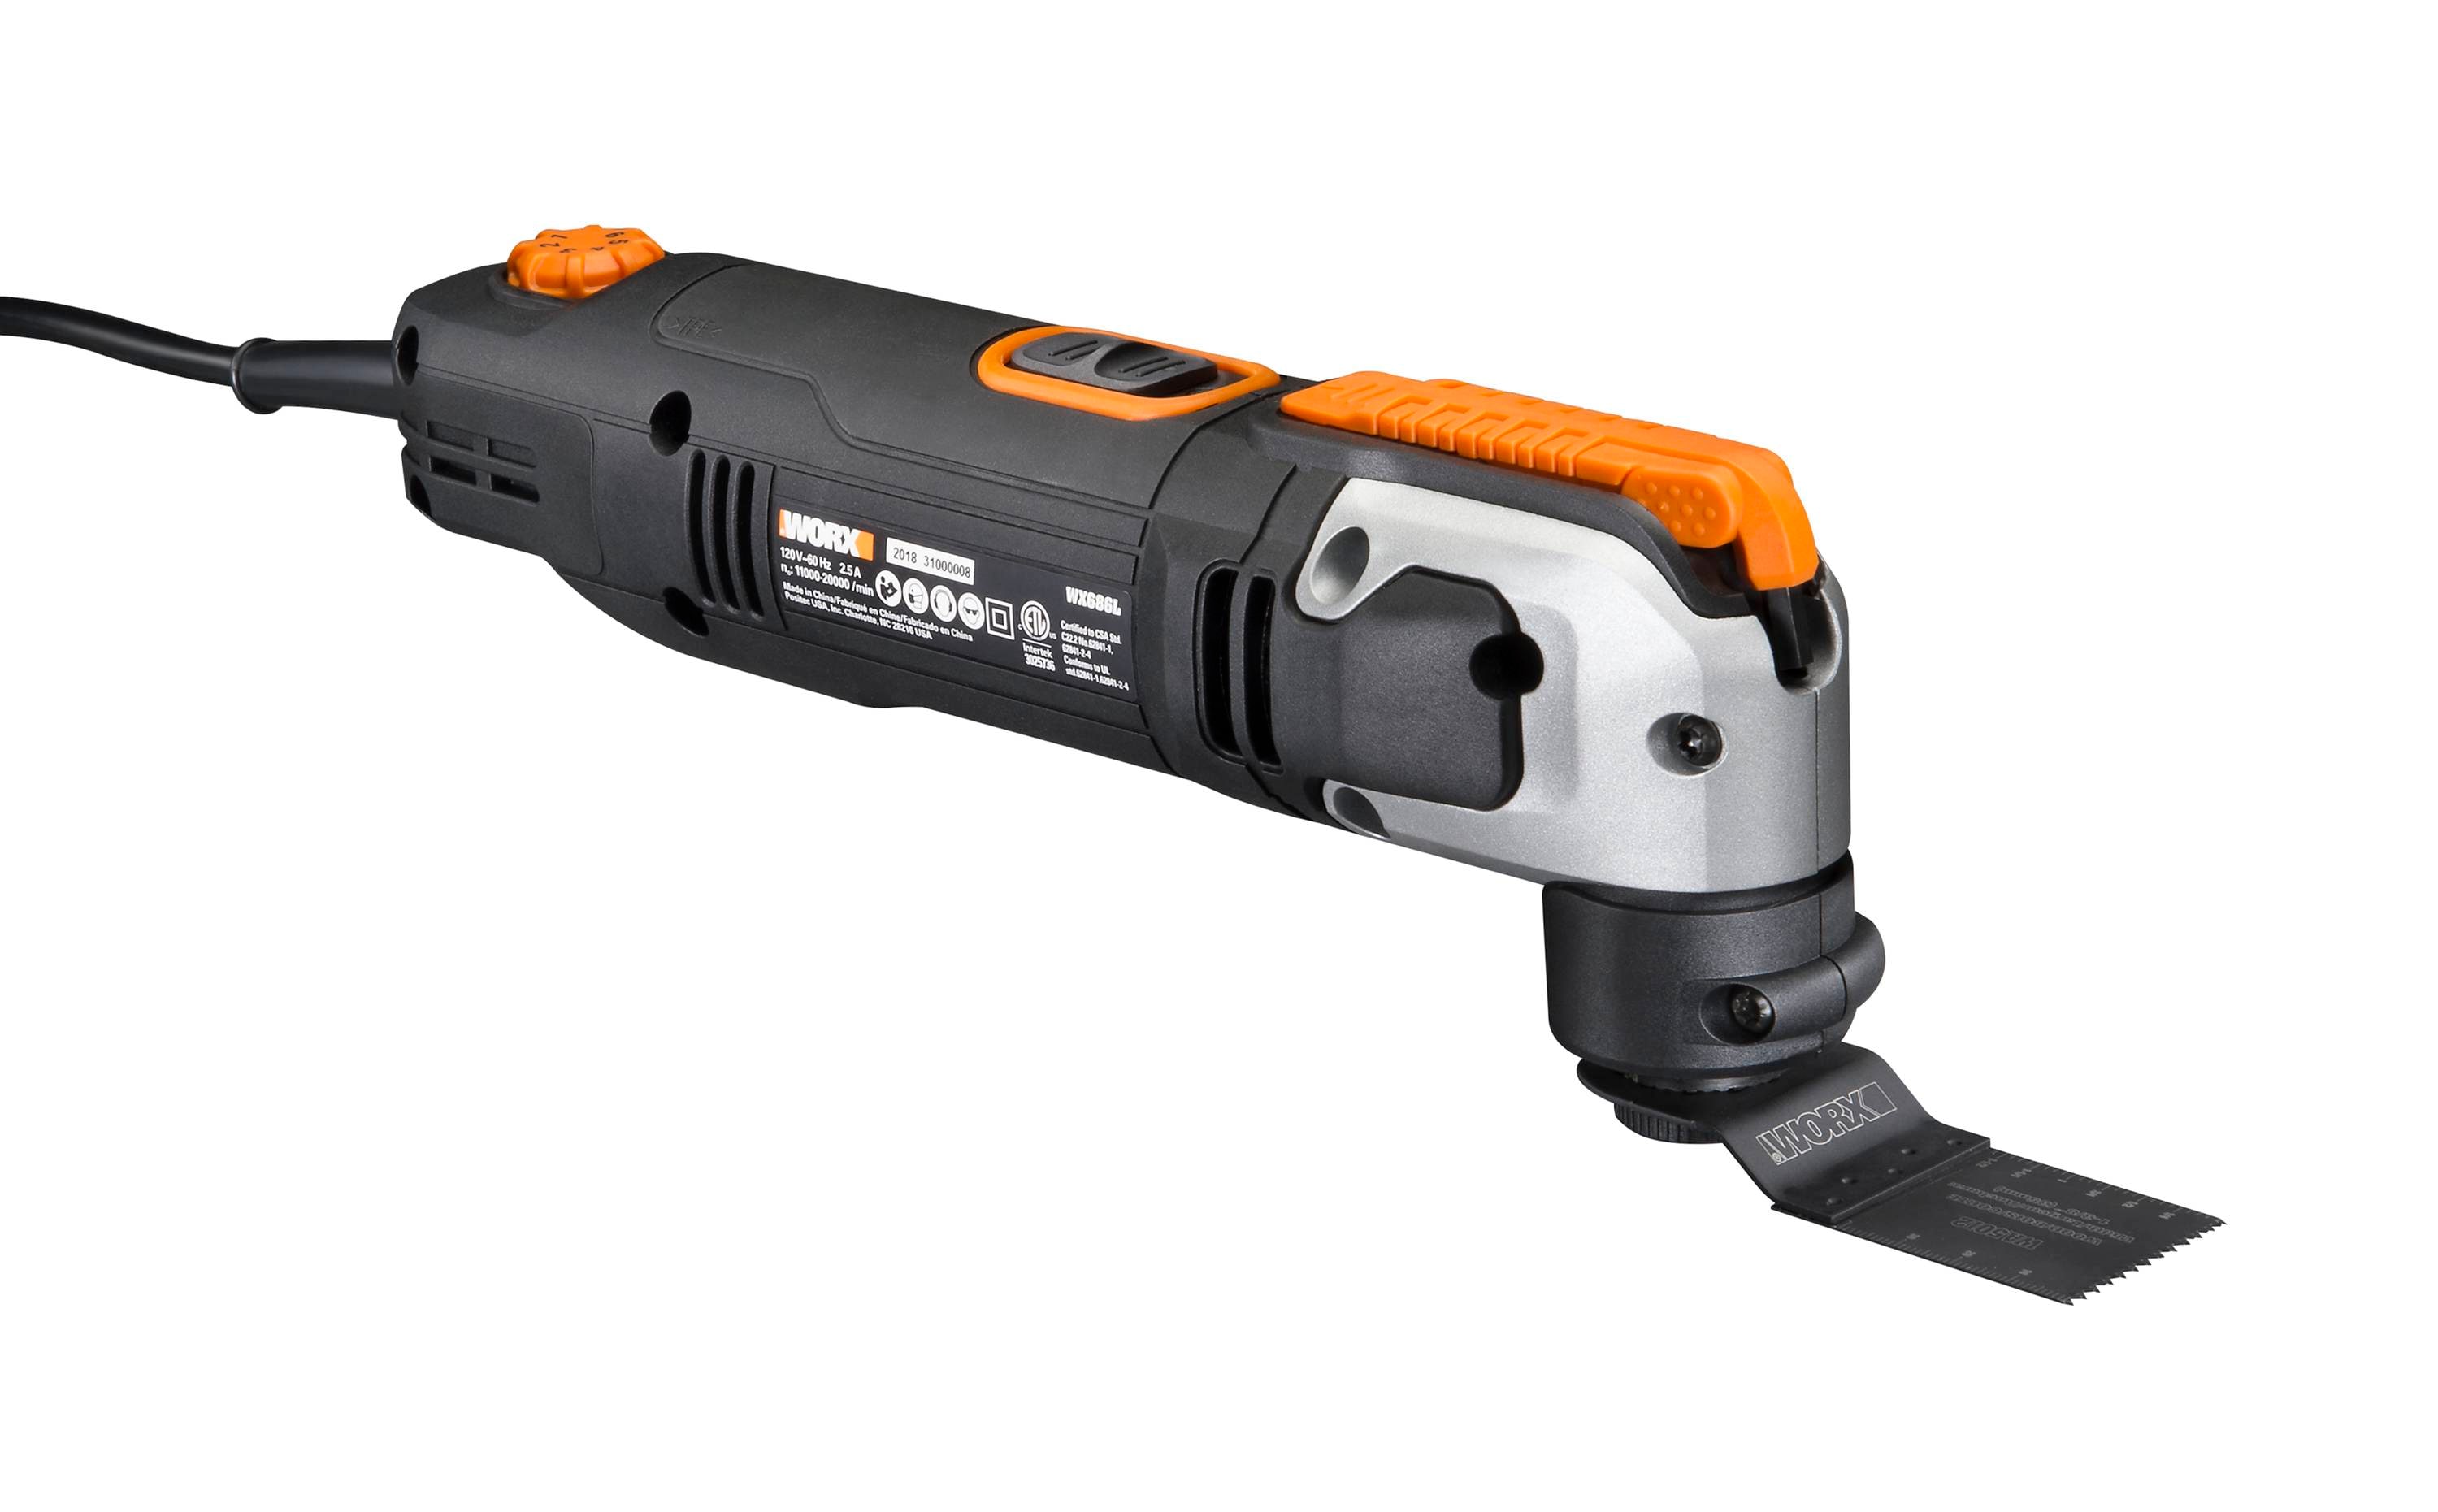 WORX Corded Variable Speed Oscillating Kit Case in the Oscillating Tool Kits department at